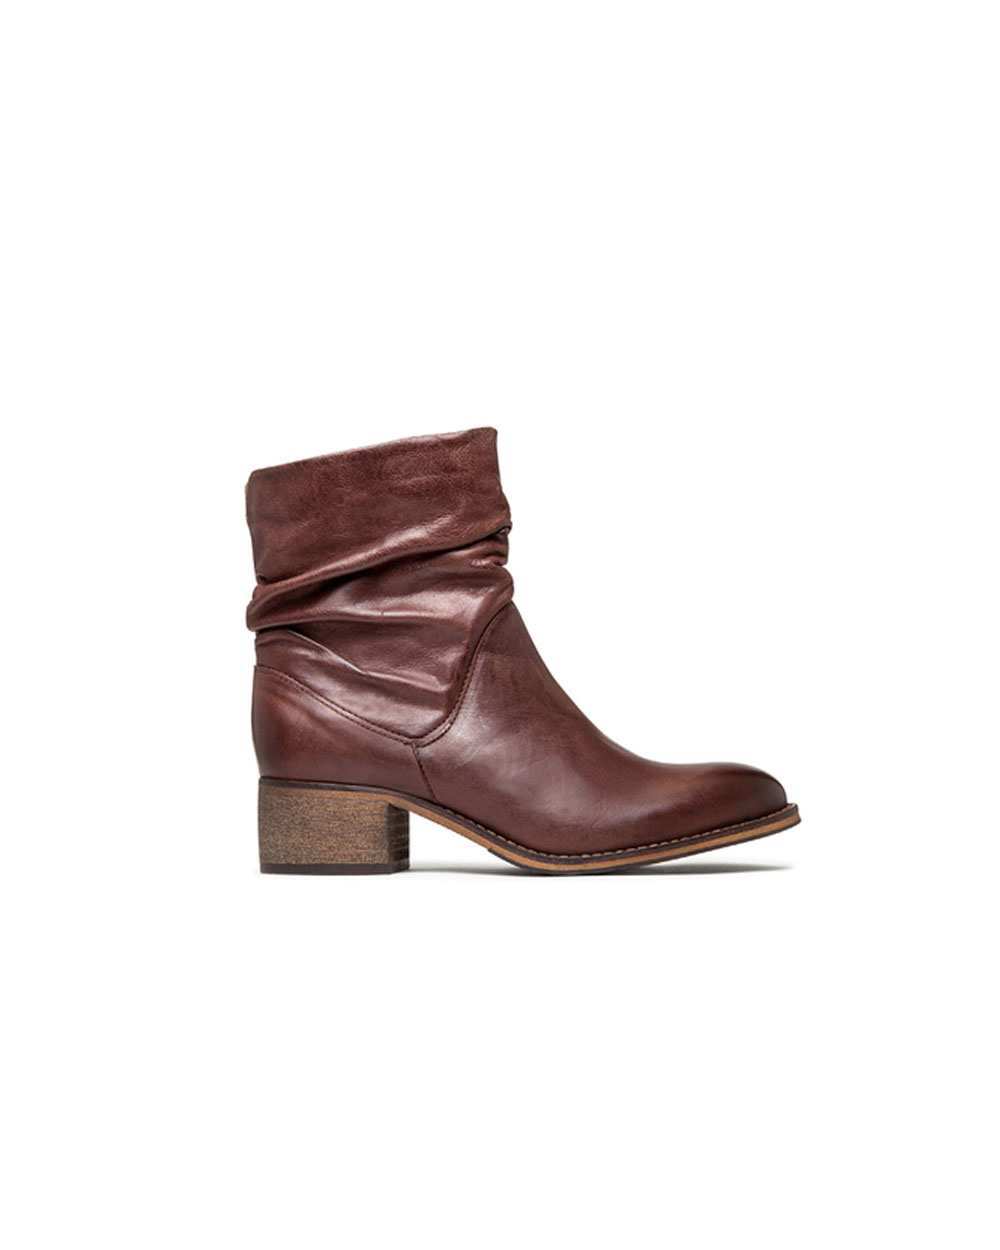 Overland Waqi ankle boots